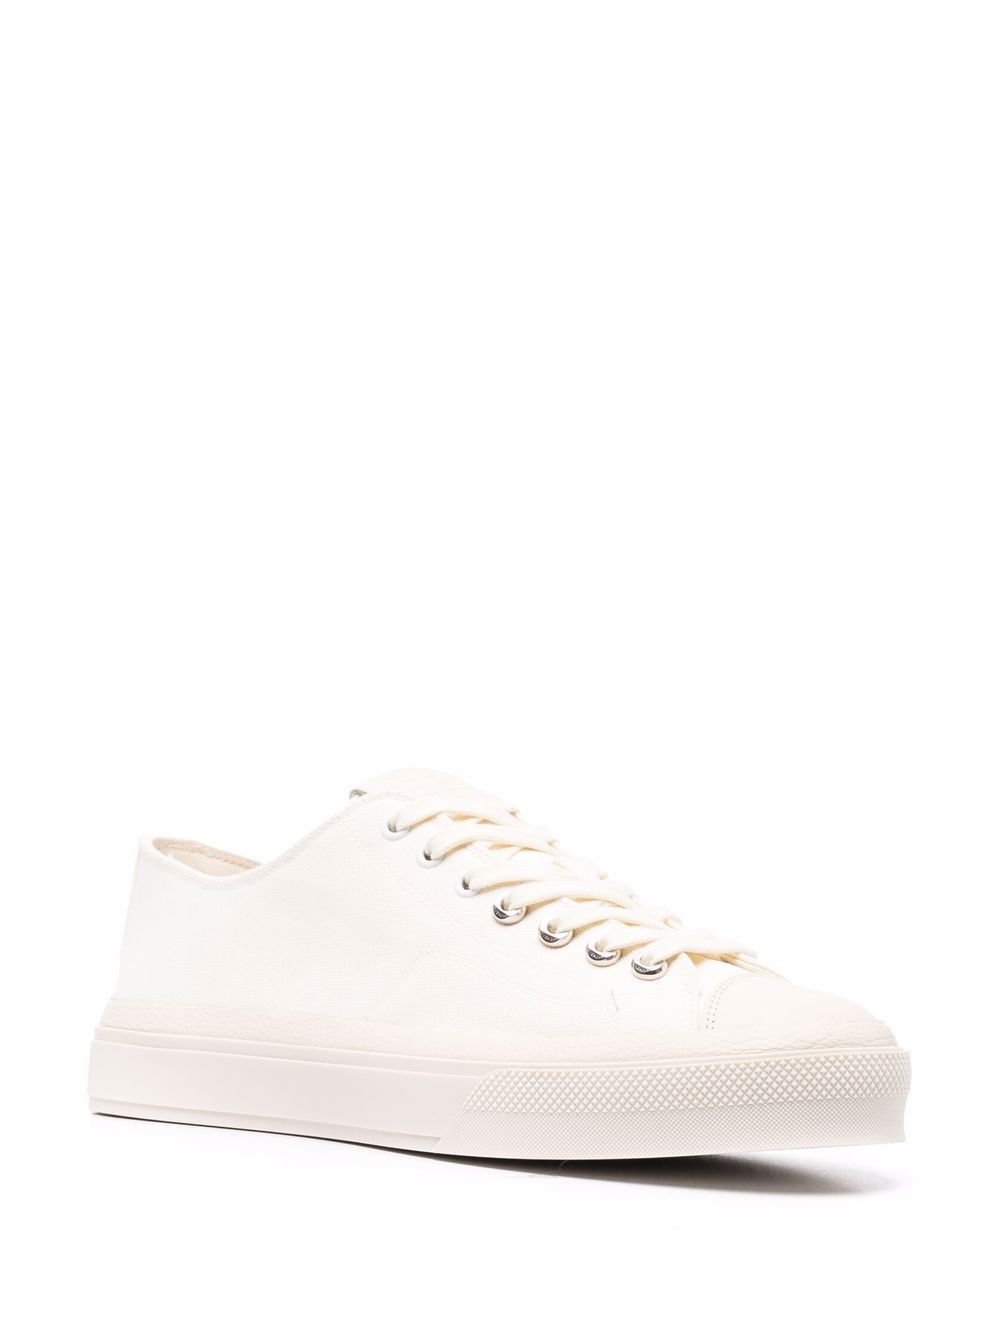 Givenchy City lace-up Canvas Sneakers - Farfetch